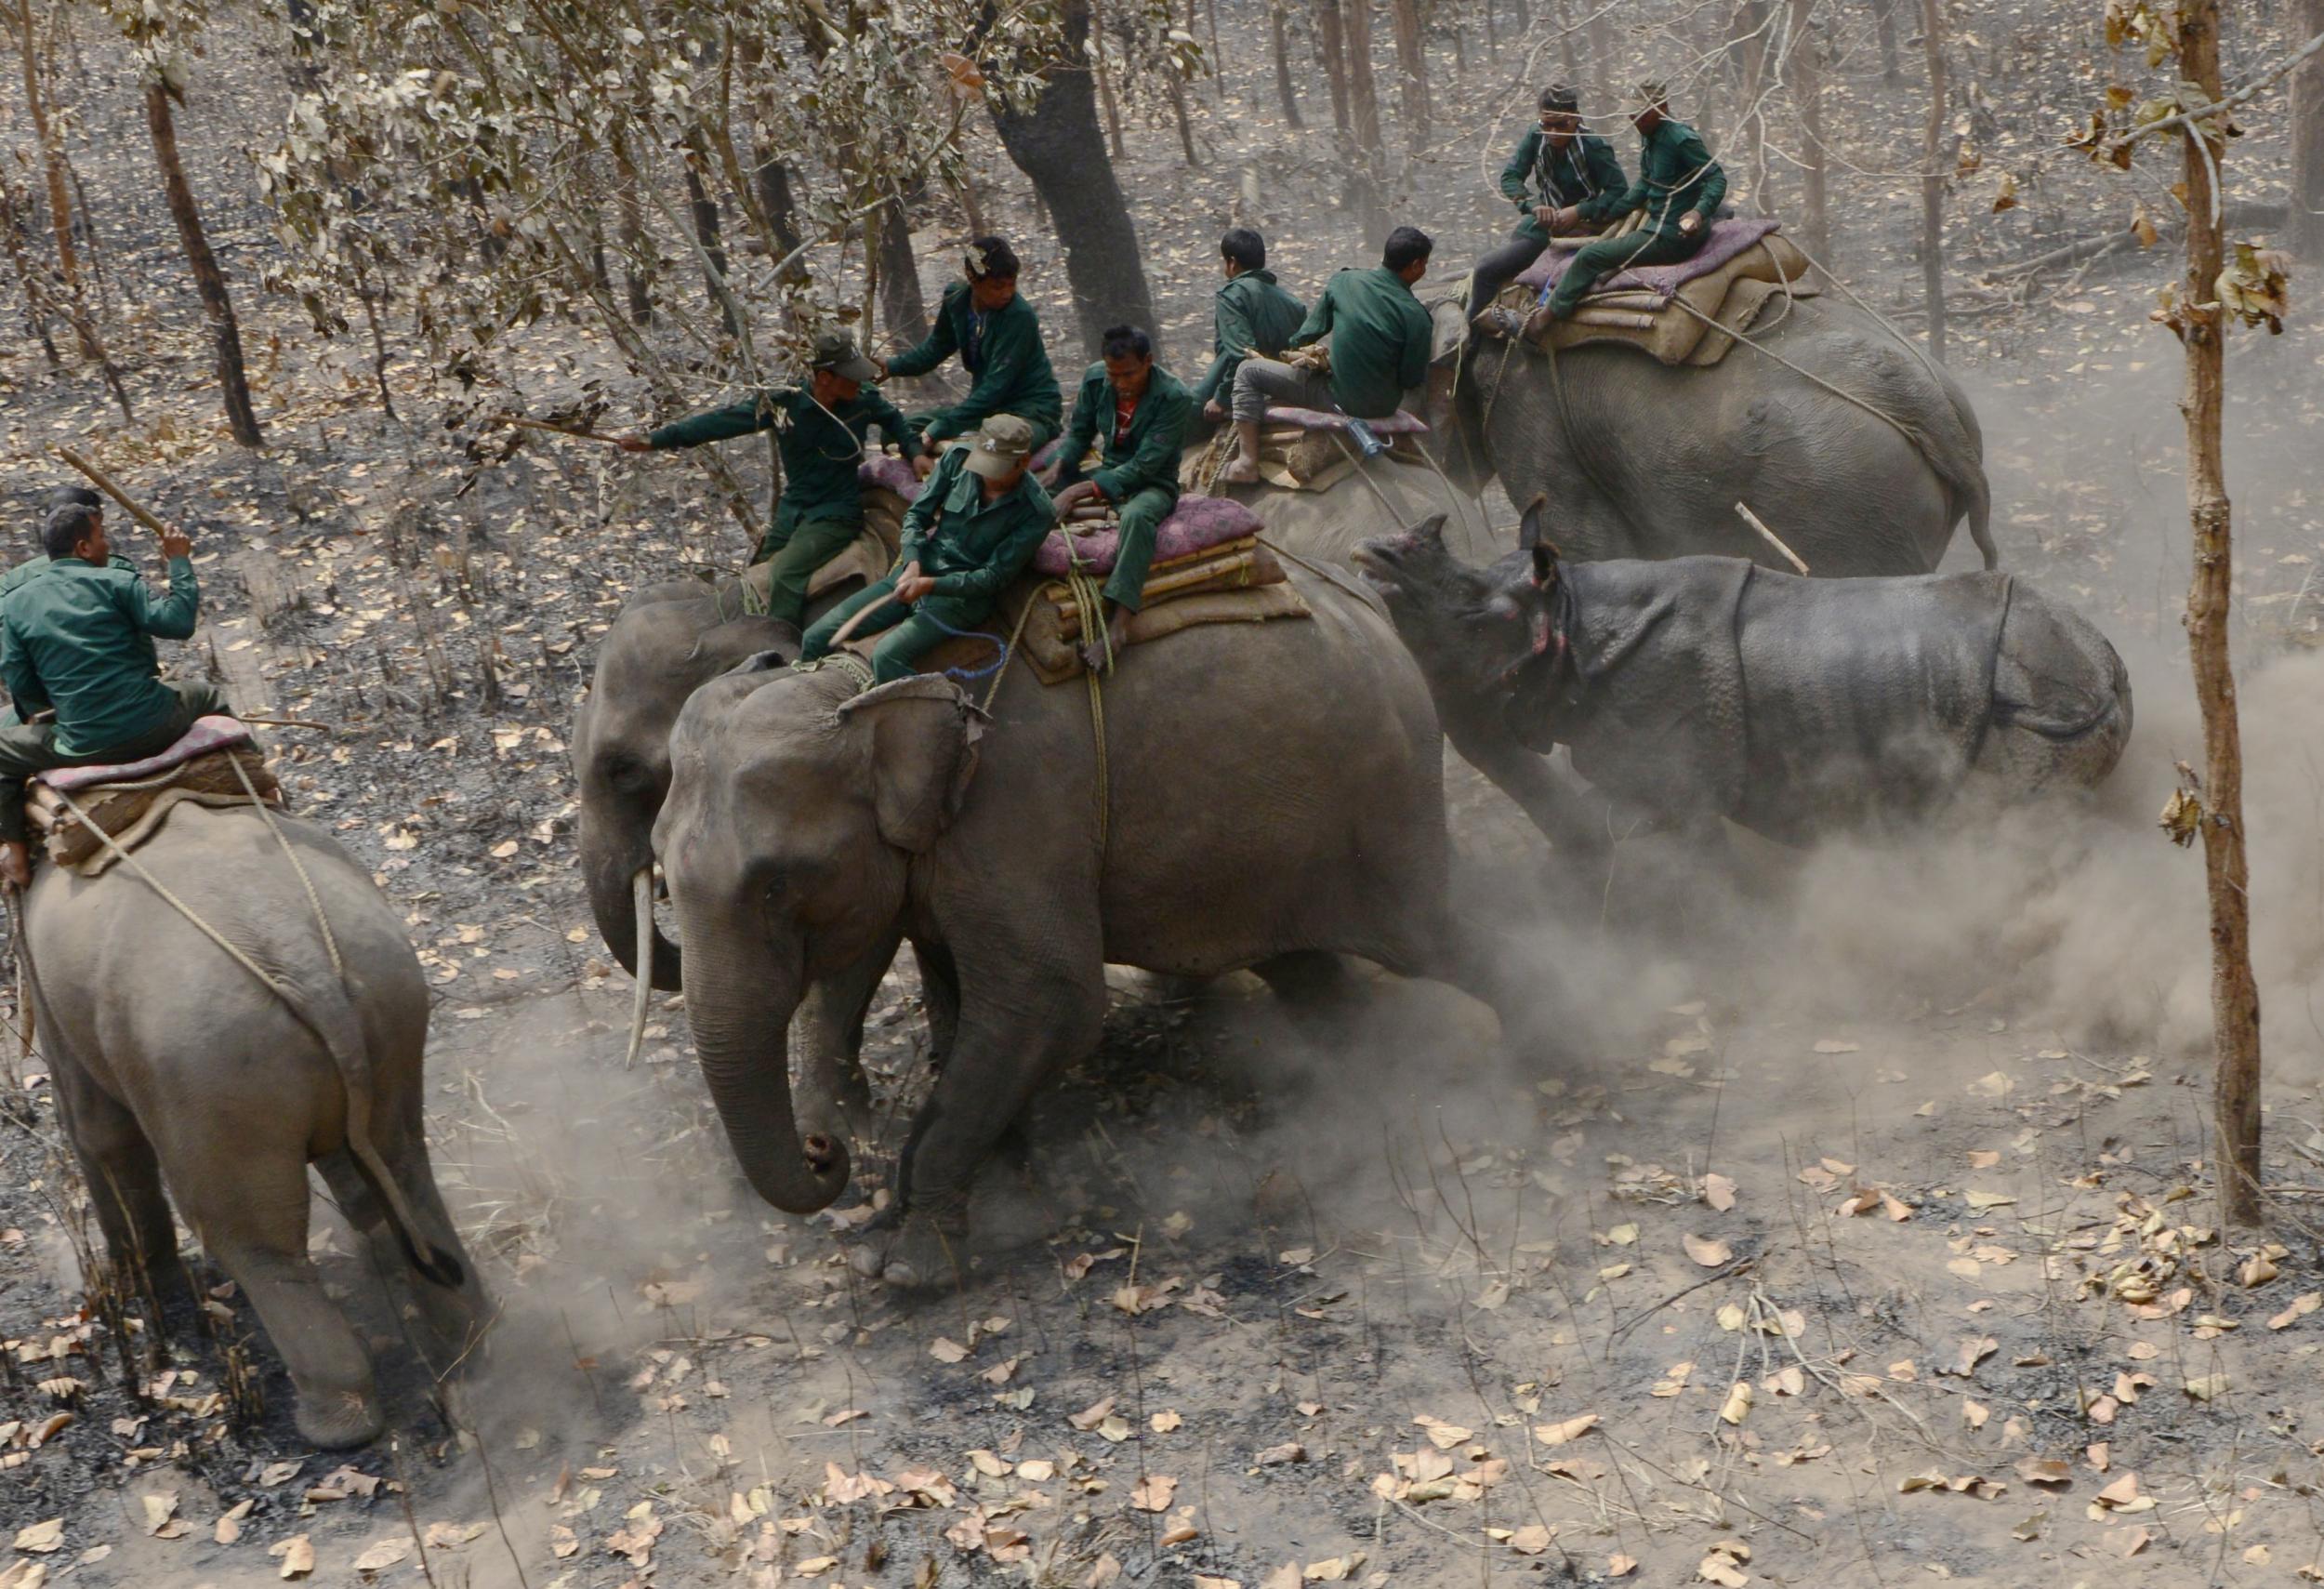 A relocated rhino charges a Nepalese forestry team